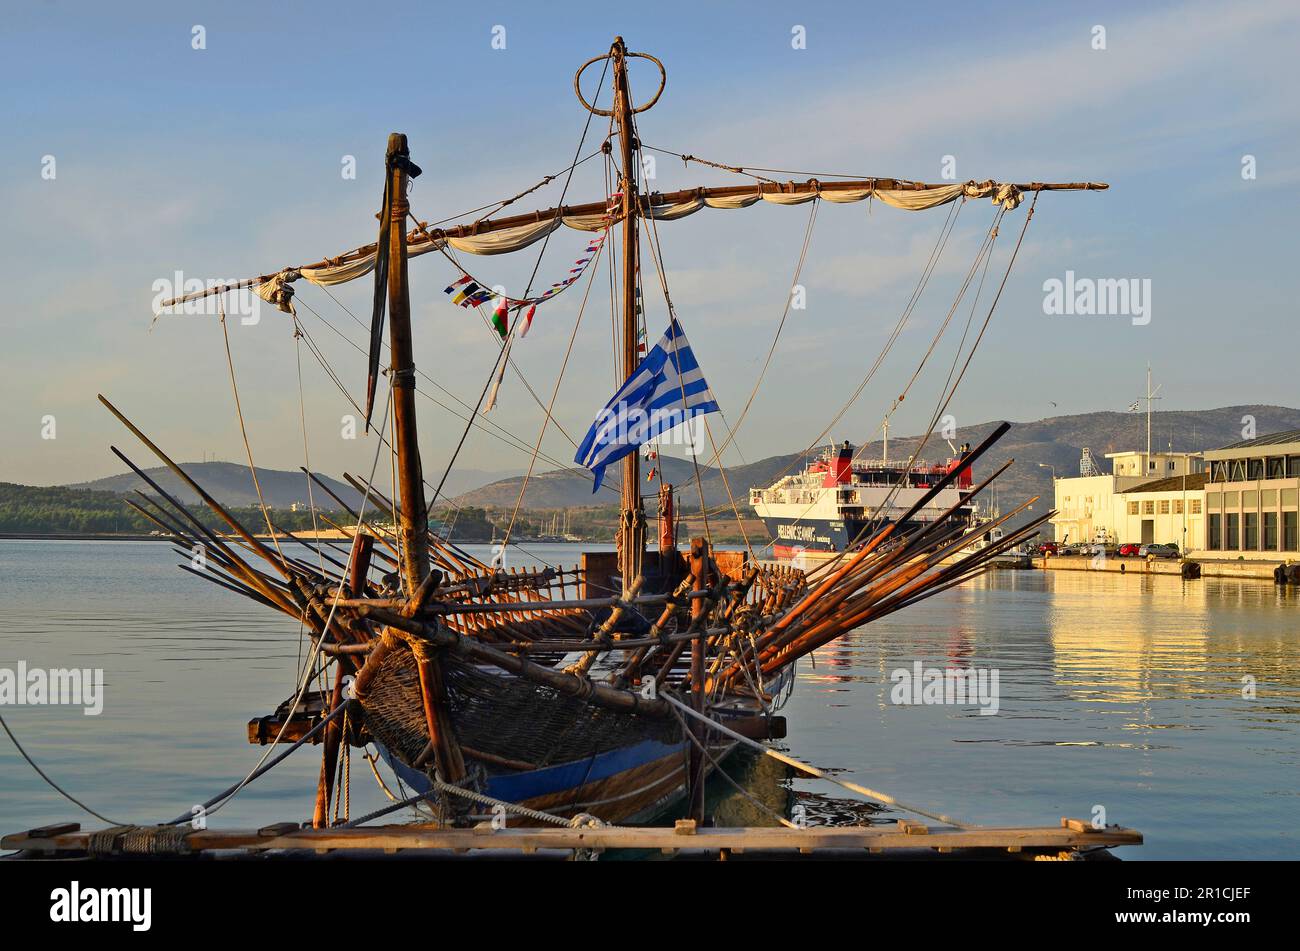 Volos, Greece - October 2nd 2012: Nostalgic rowing boat - galley in the harbor of Volos, in background car ferry to Greek islands Stock Photo